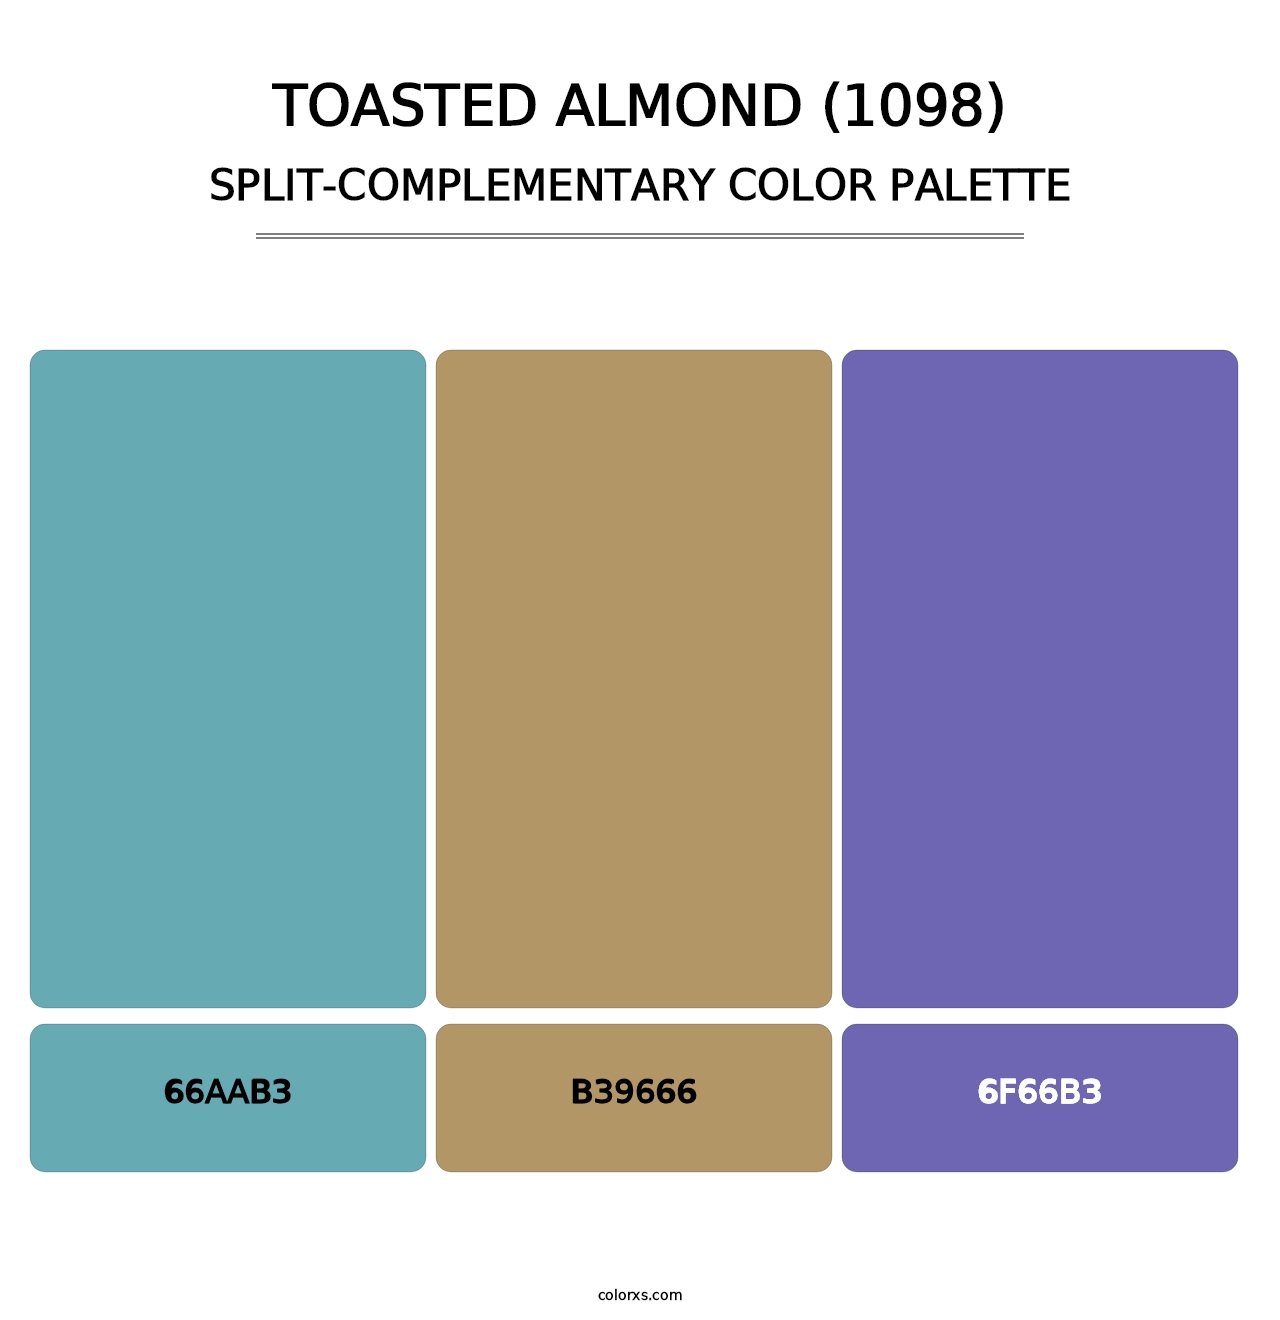 Toasted Almond (1098) - Split-Complementary Color Palette